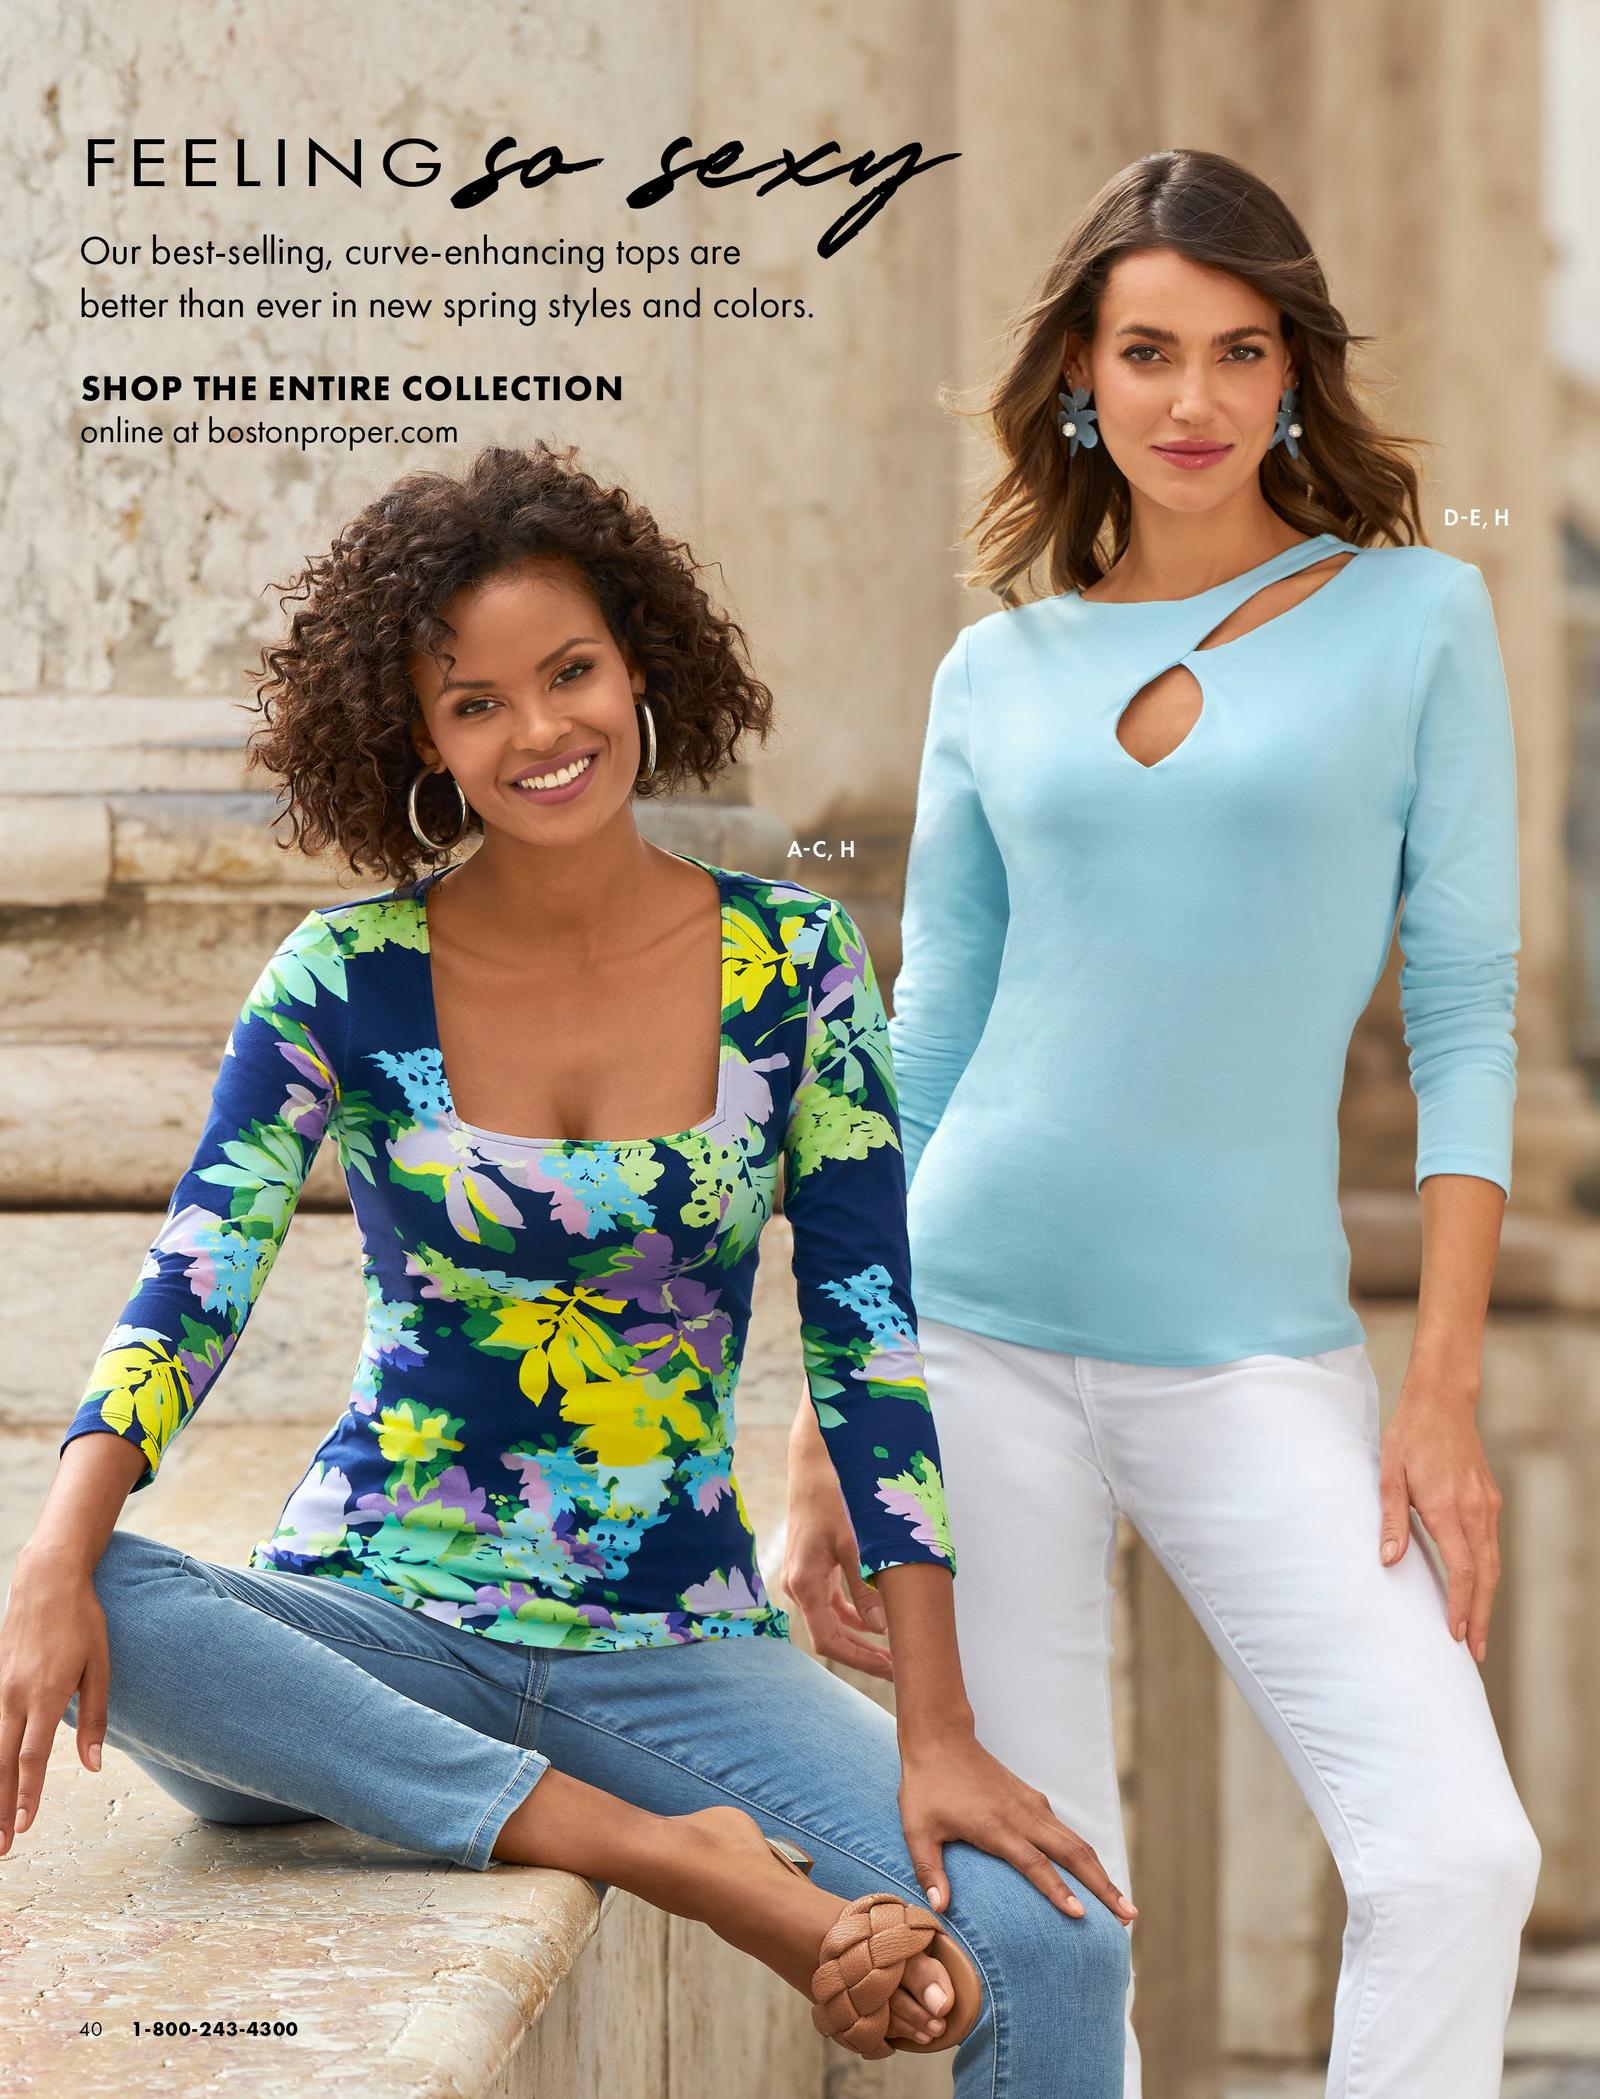 left model wearing a floral print multicolored scoop-neck three-quarter sleeve top, light wash jeans, and tan braided sandals. right model wearing a light blue keyhole long-sleeve top and white jeans.